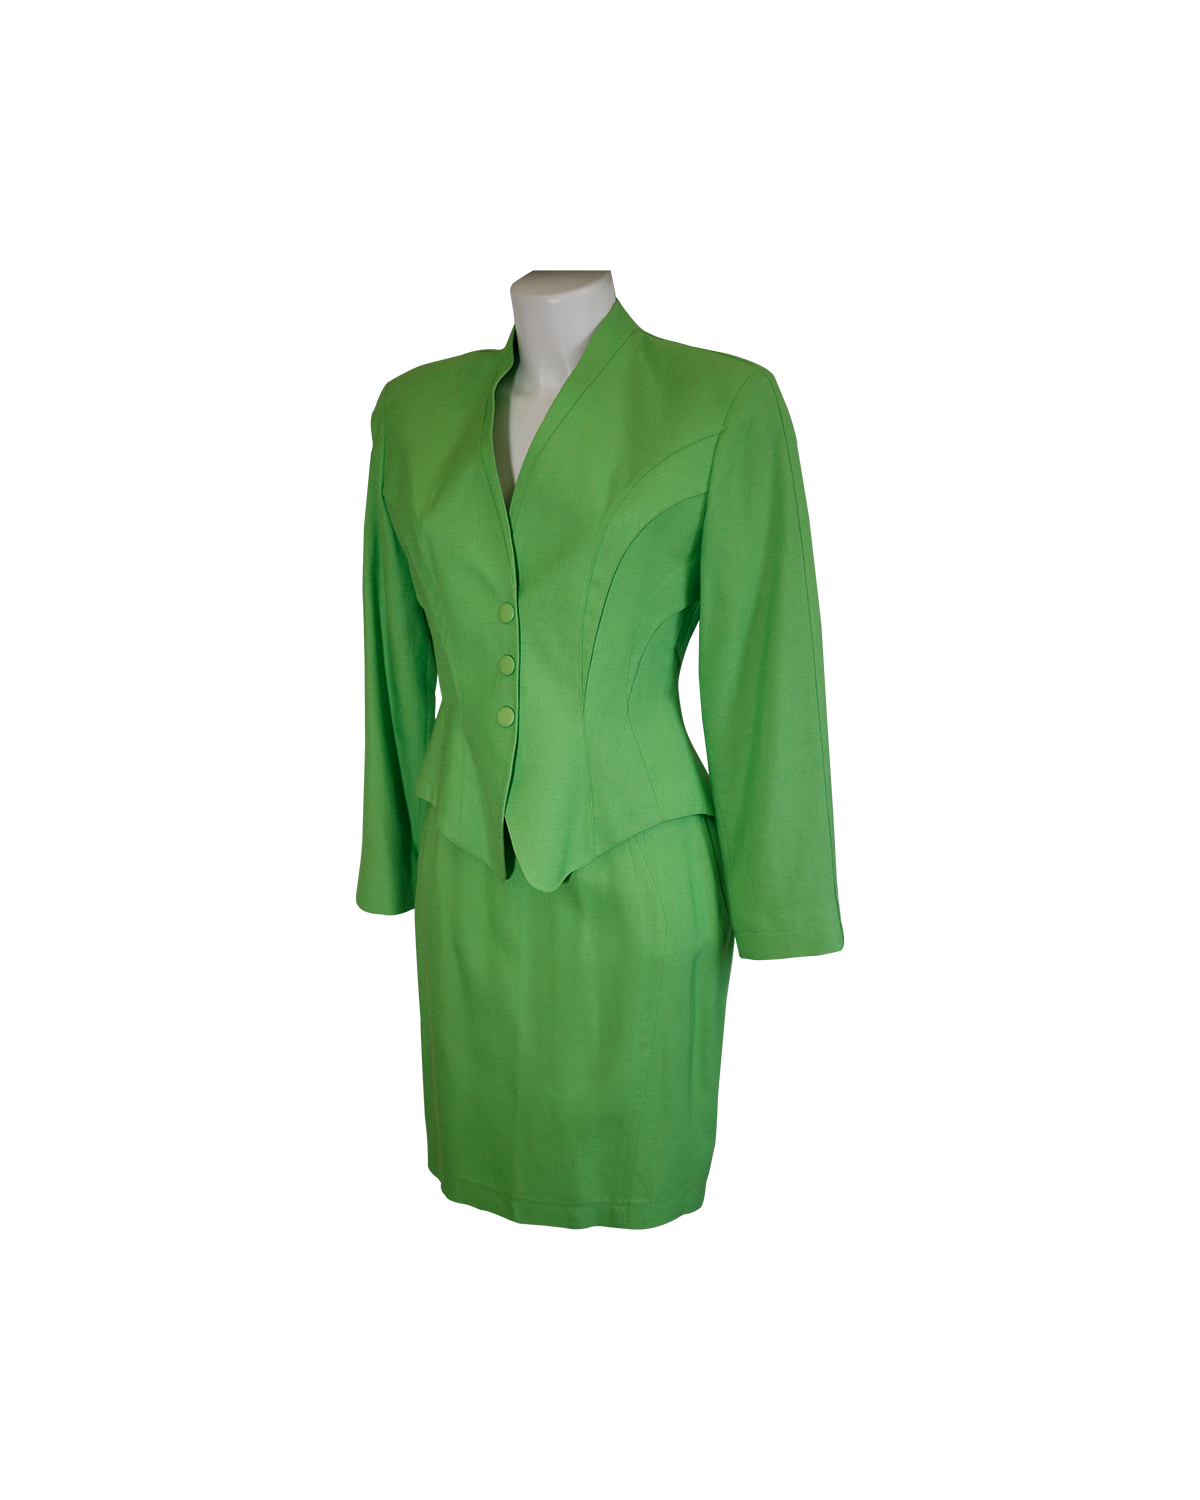 Thierry Mugler Green Suit from 1990s